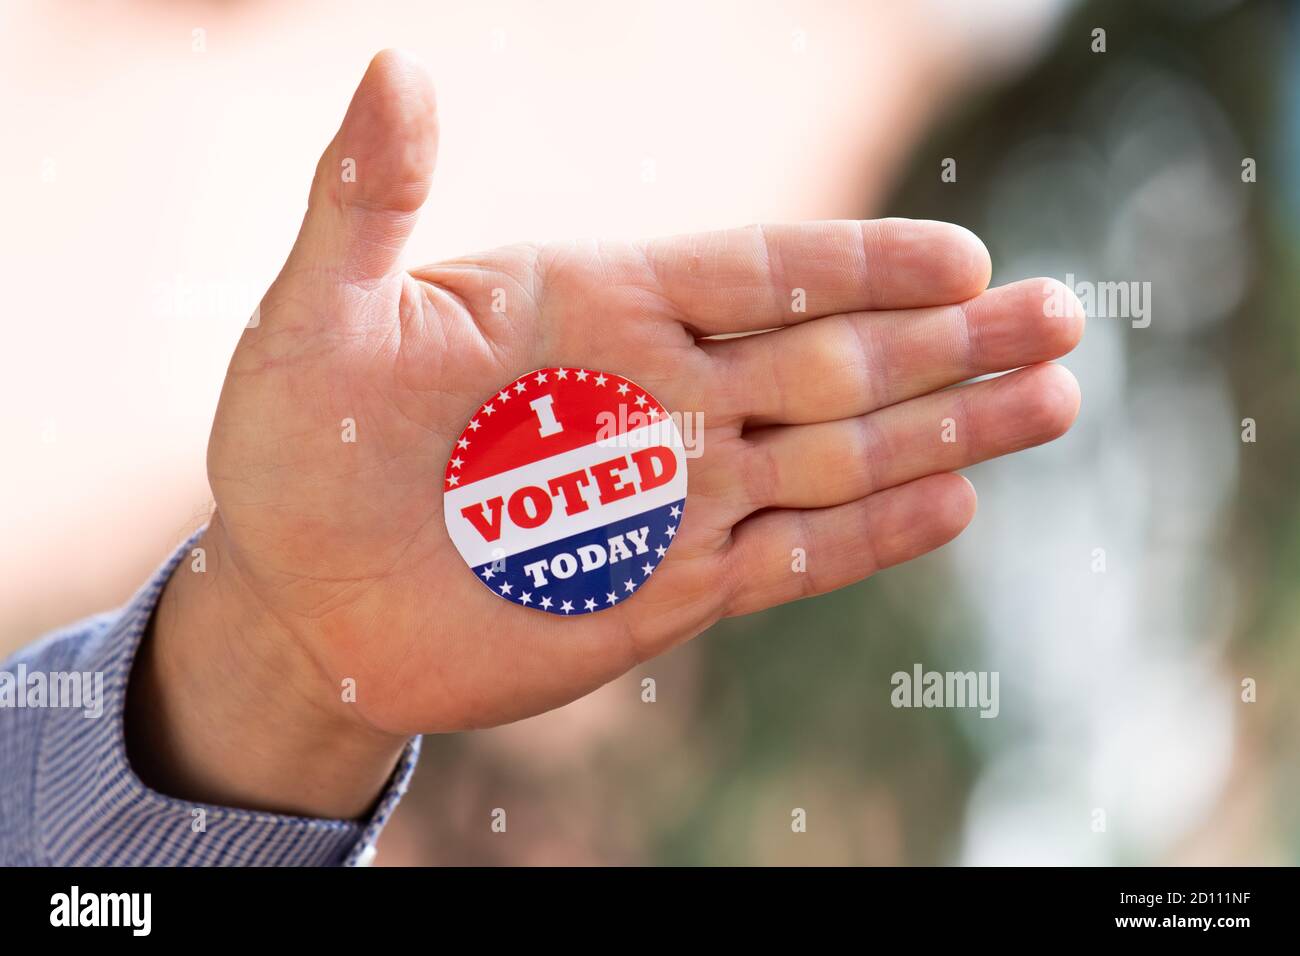 I voted today sticker for presidential election in United States, politics sign on human hand Stock Photo